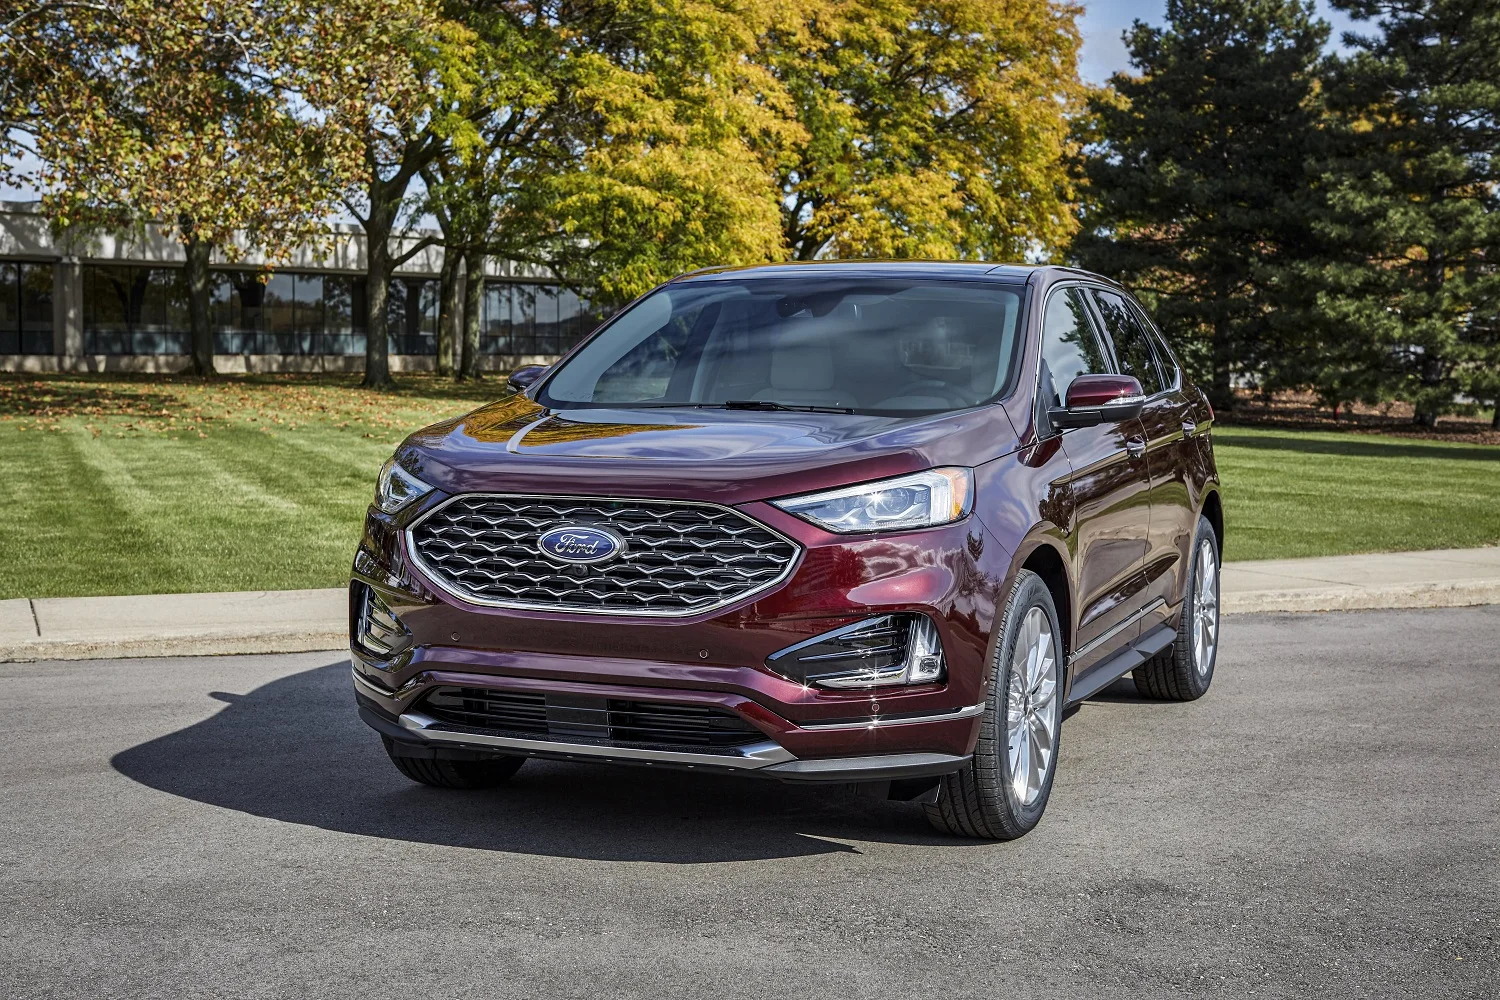 Ford SUV Ownership: Tips For Long-Term Satisfaction